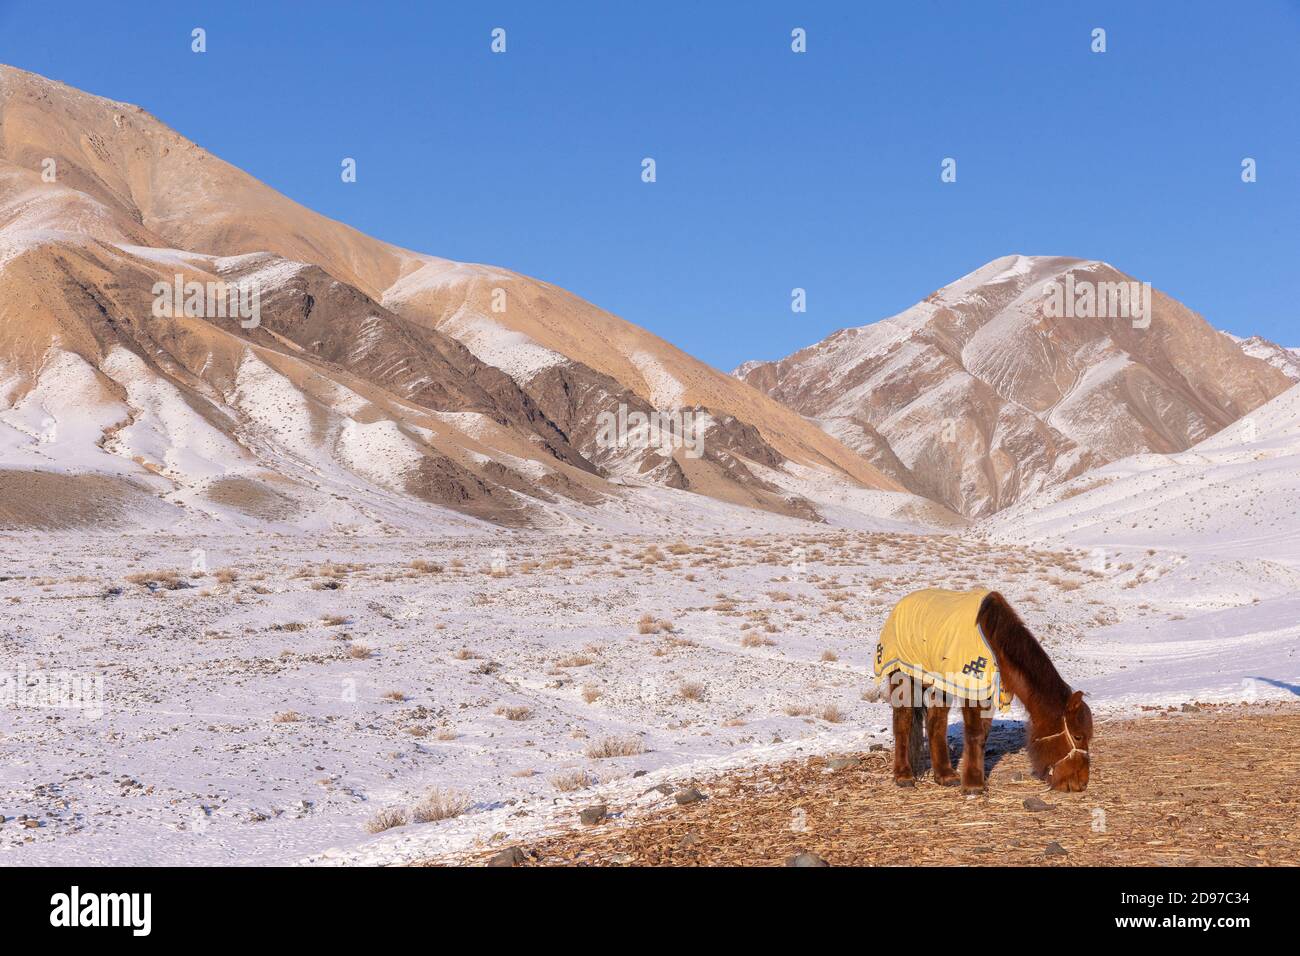 Horse with a blanket against the cold, Valley with snow and rocks, Altai mountains, West Mongolia, Mongolia Stock Photo